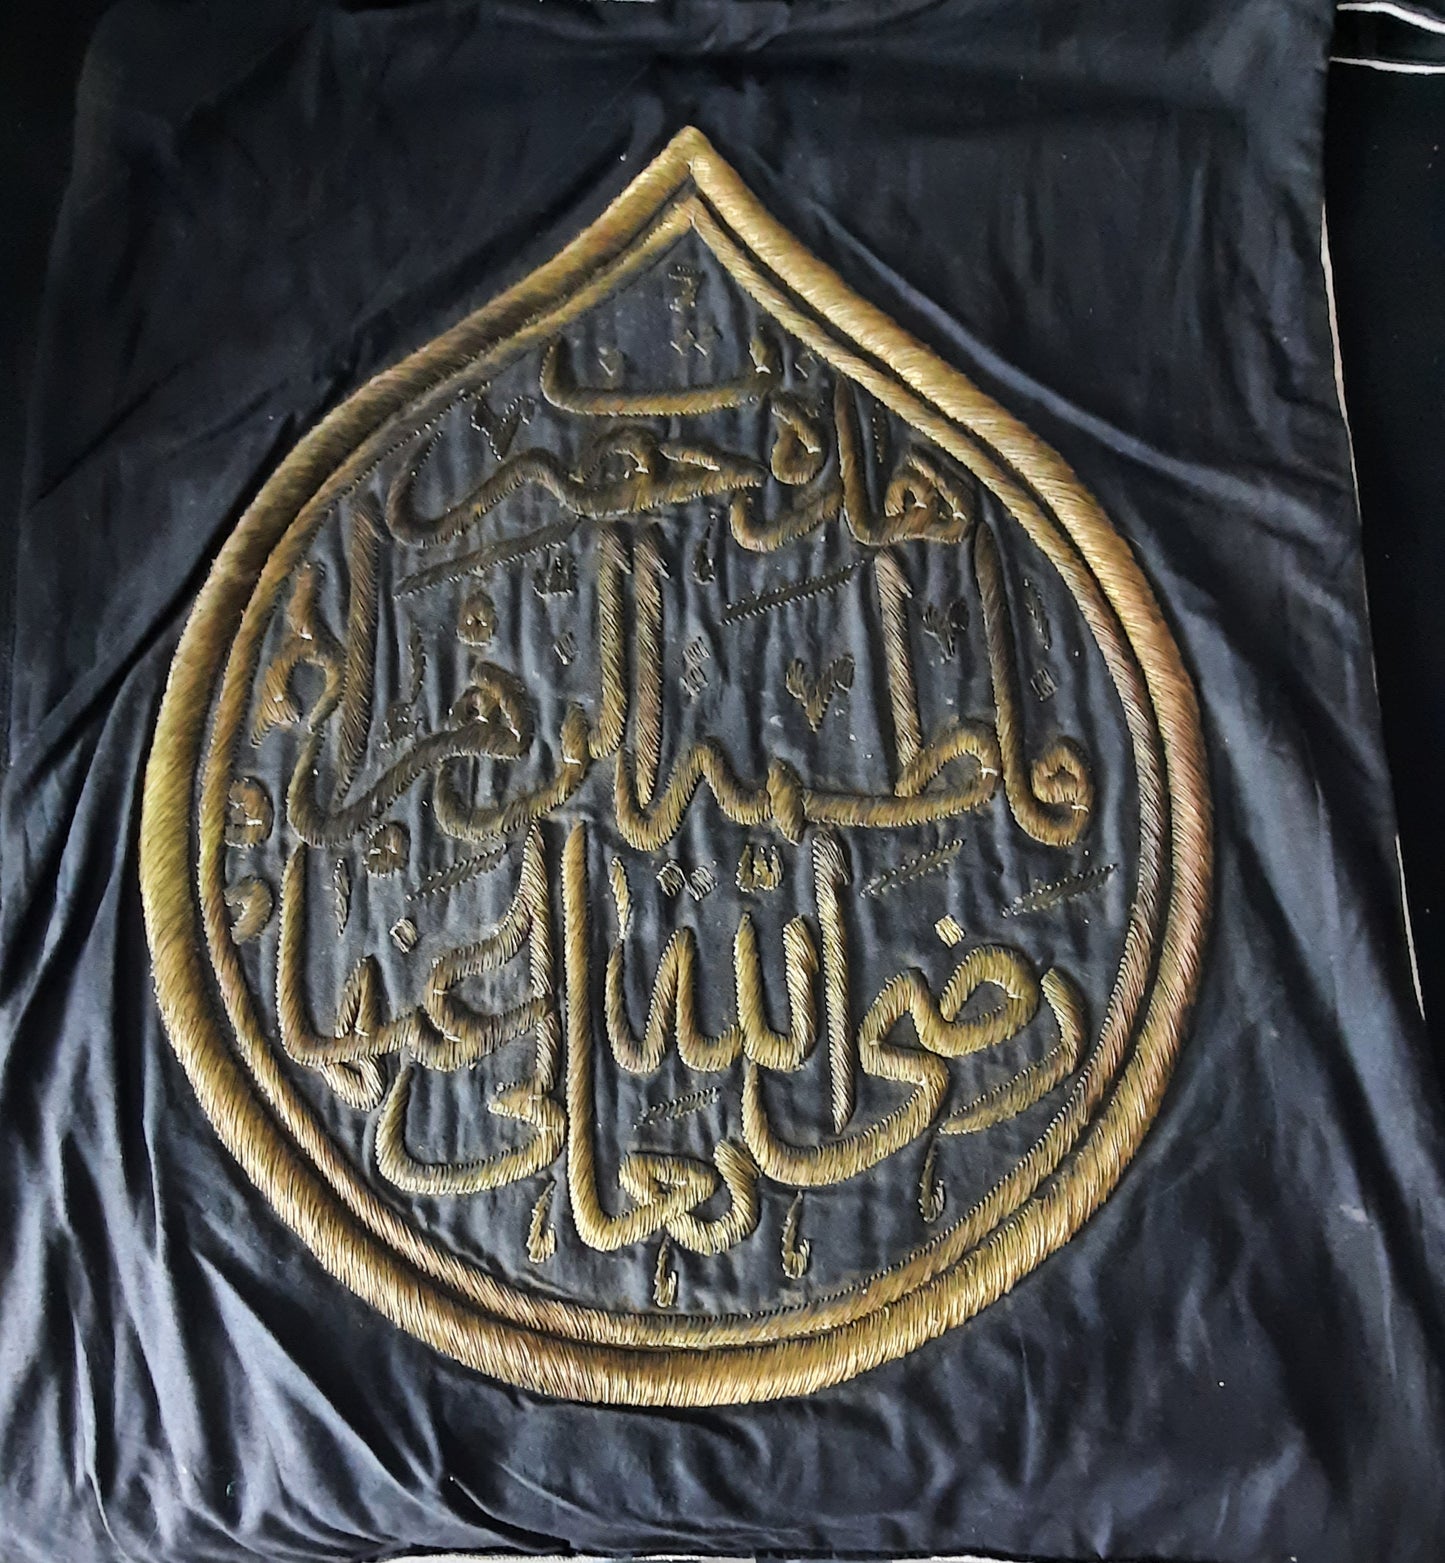 Ottoman Curtain Related To Fatimatu Zahra RA from Masjid Nabawi , Prophet Mosque in Medina